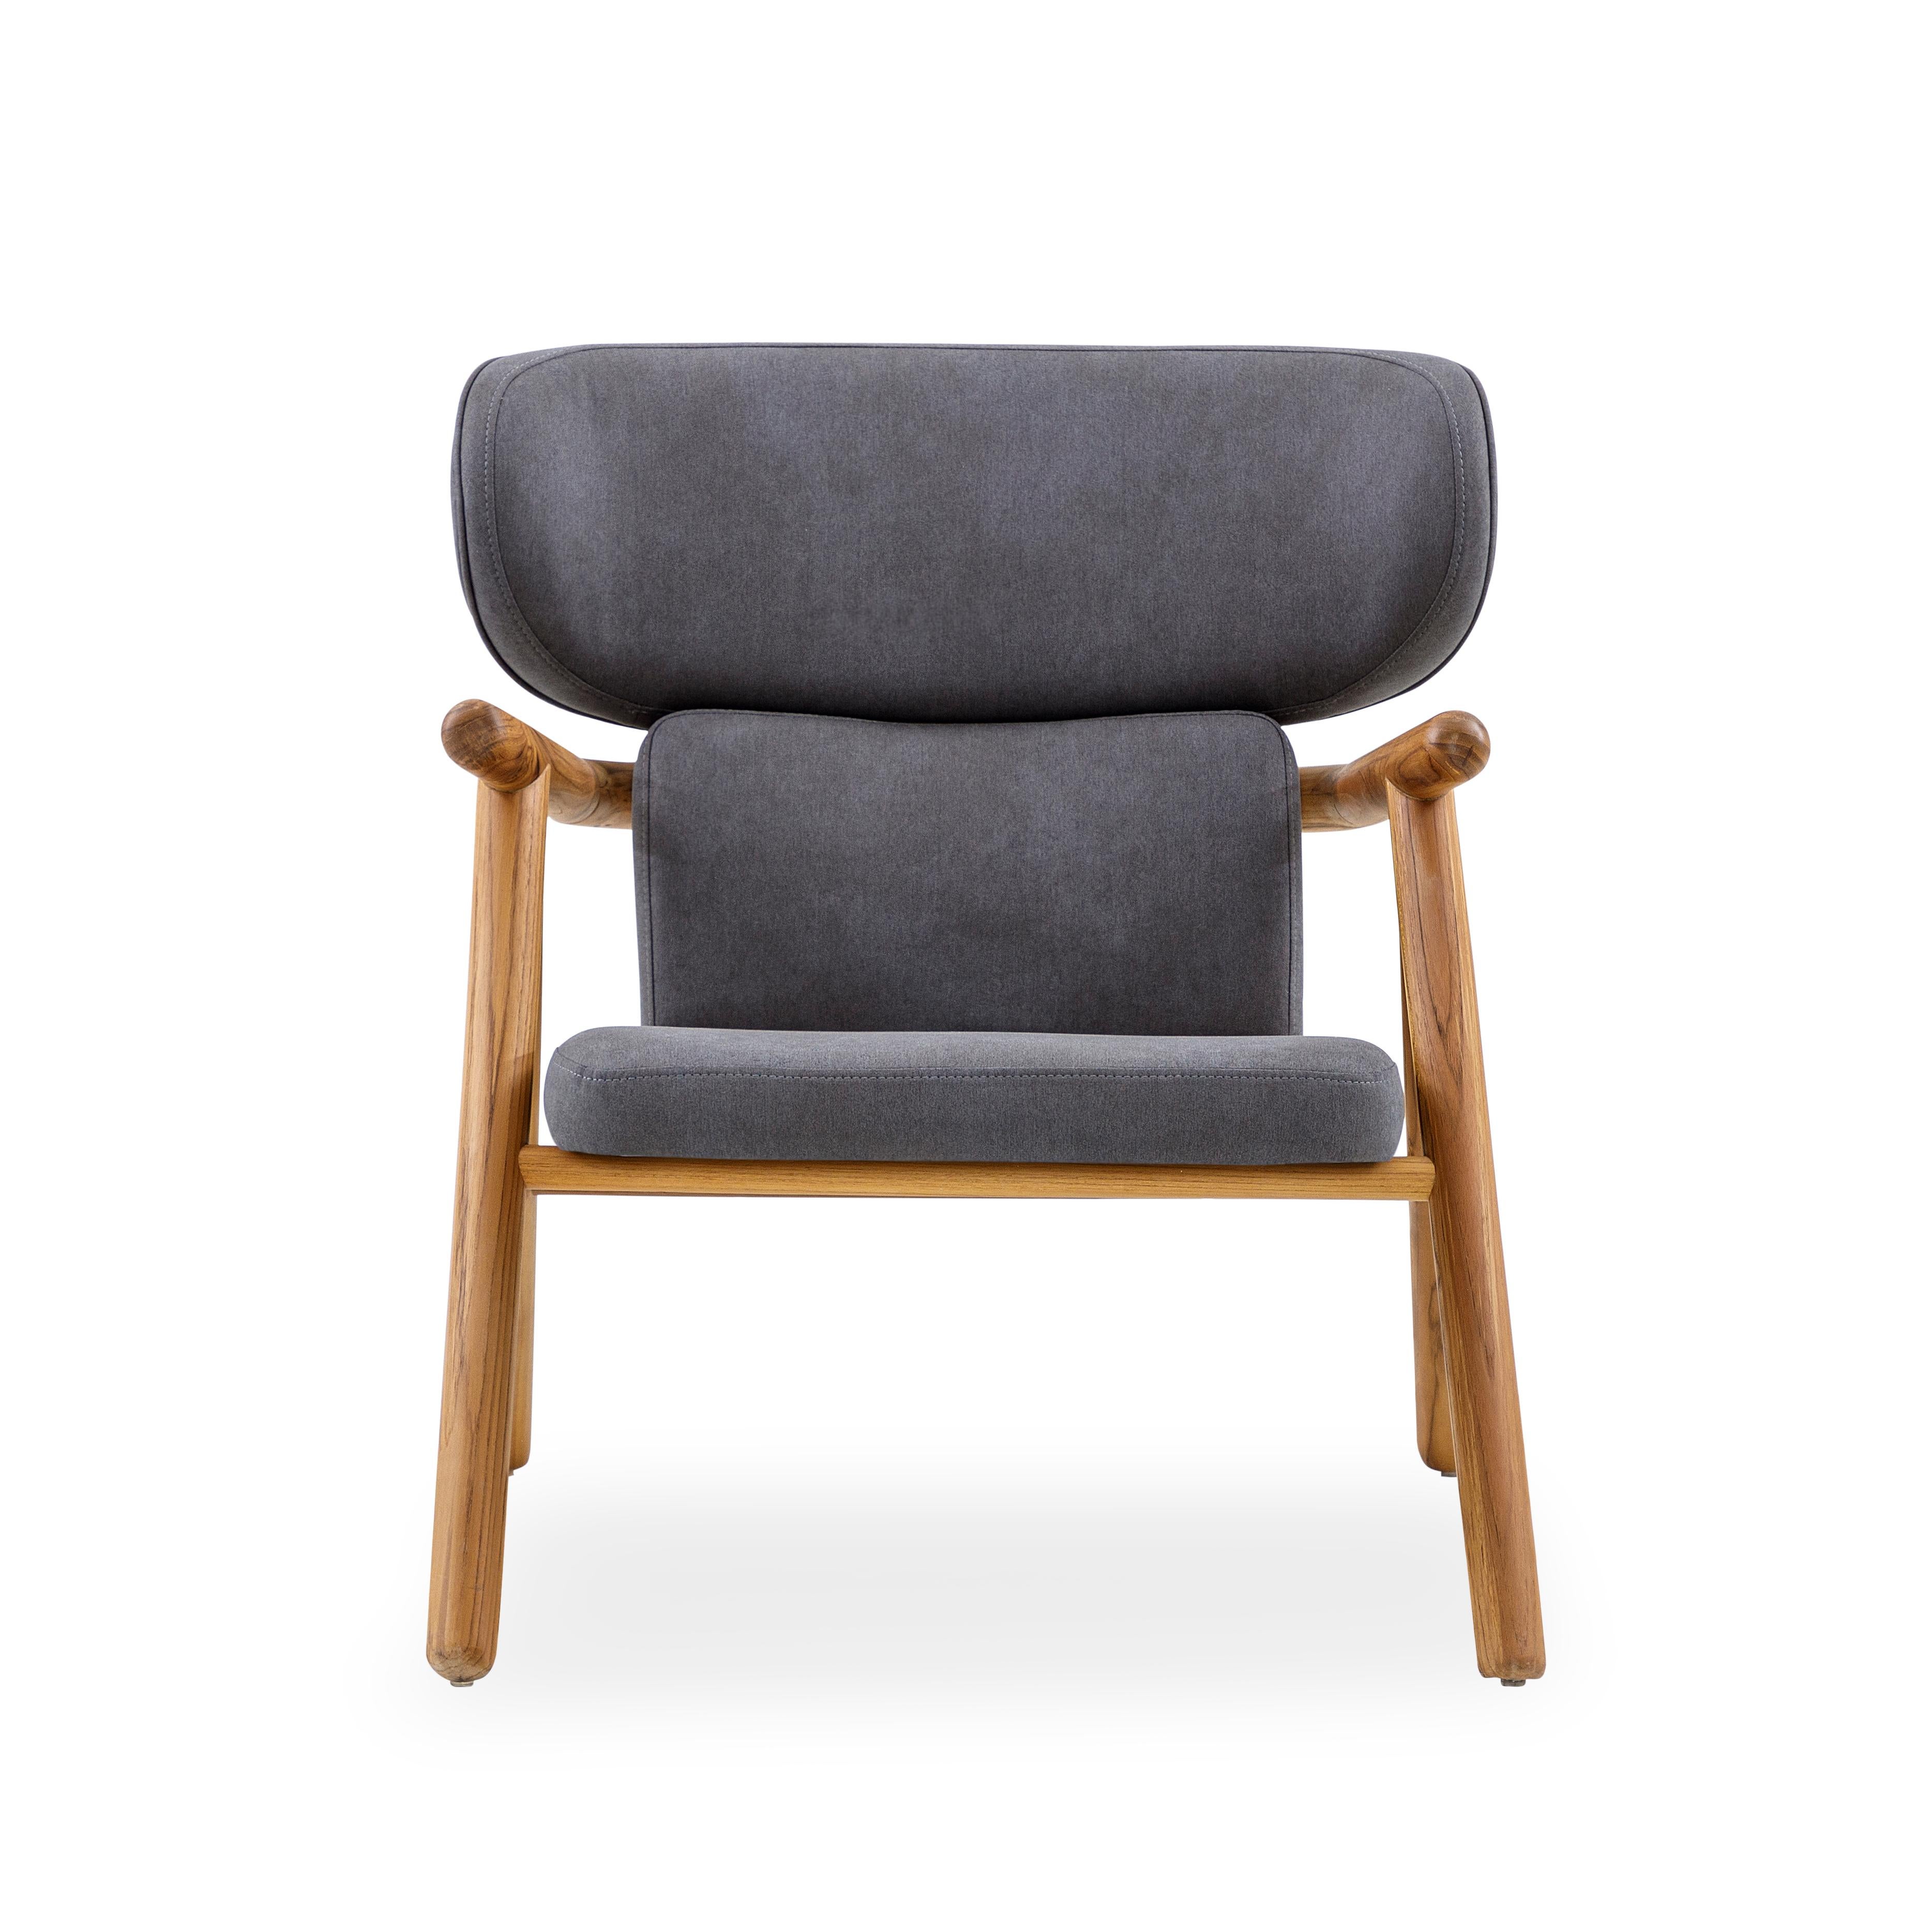 Contemporary Sole Scandinavian-Styled Armchair in Teak Wood Finish and Charcoal Fabric For Sale